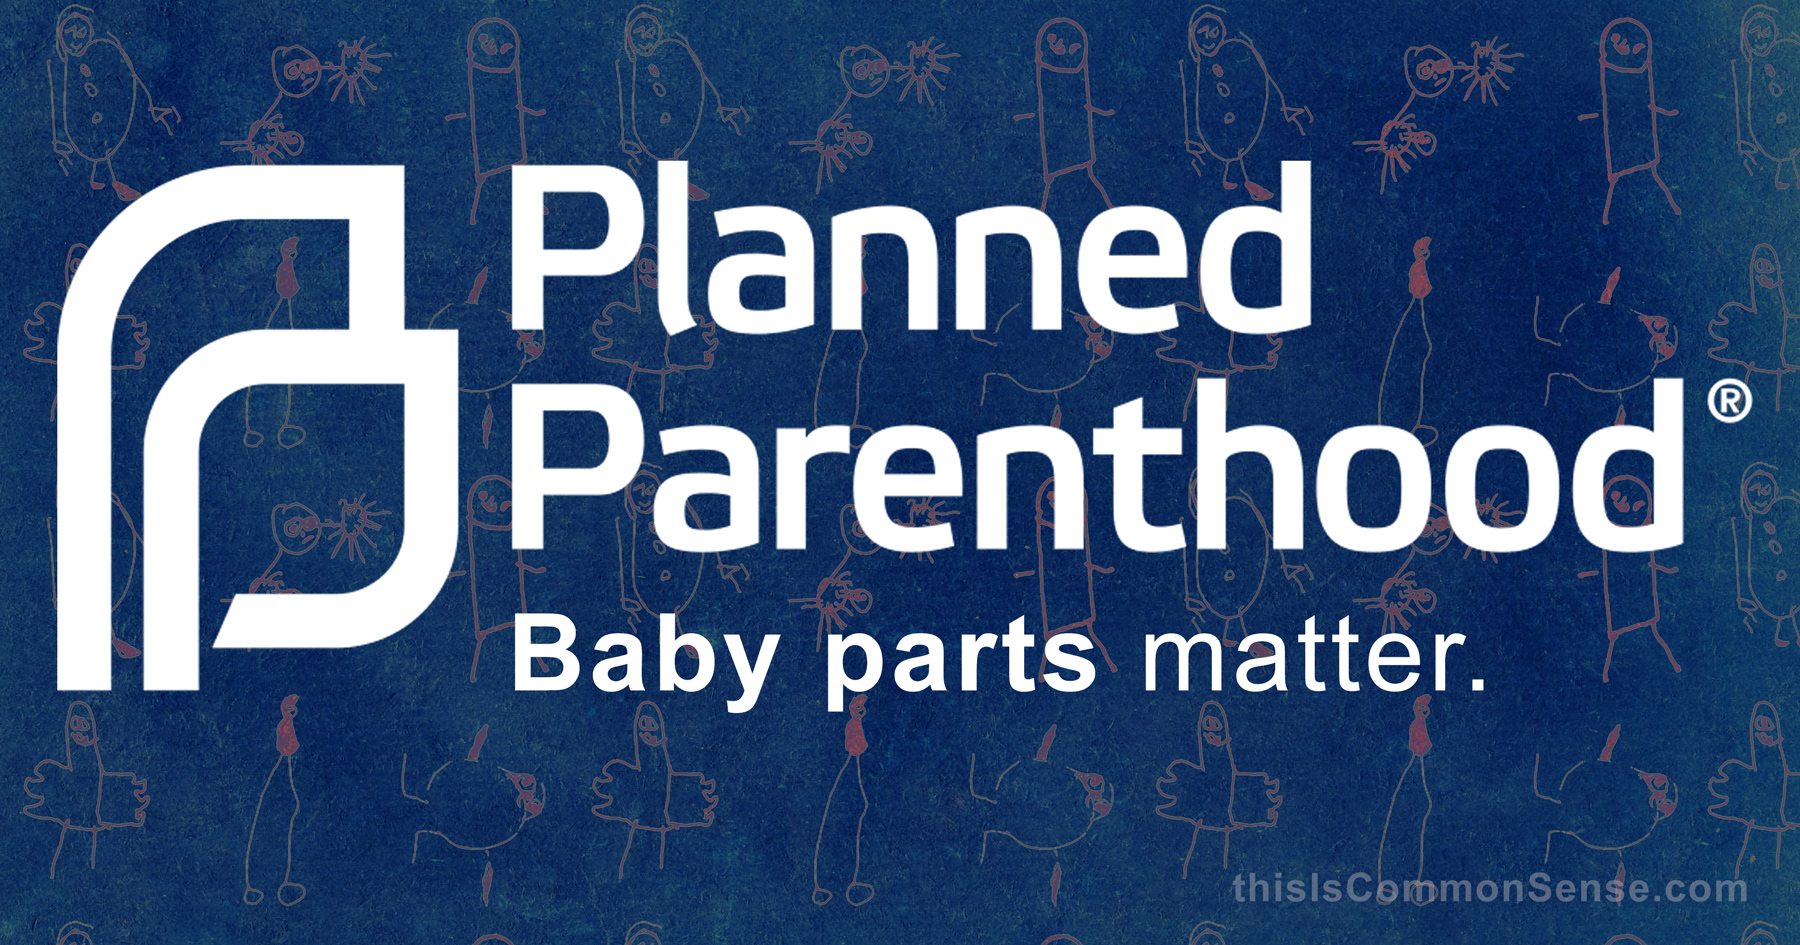 Baby parts matter